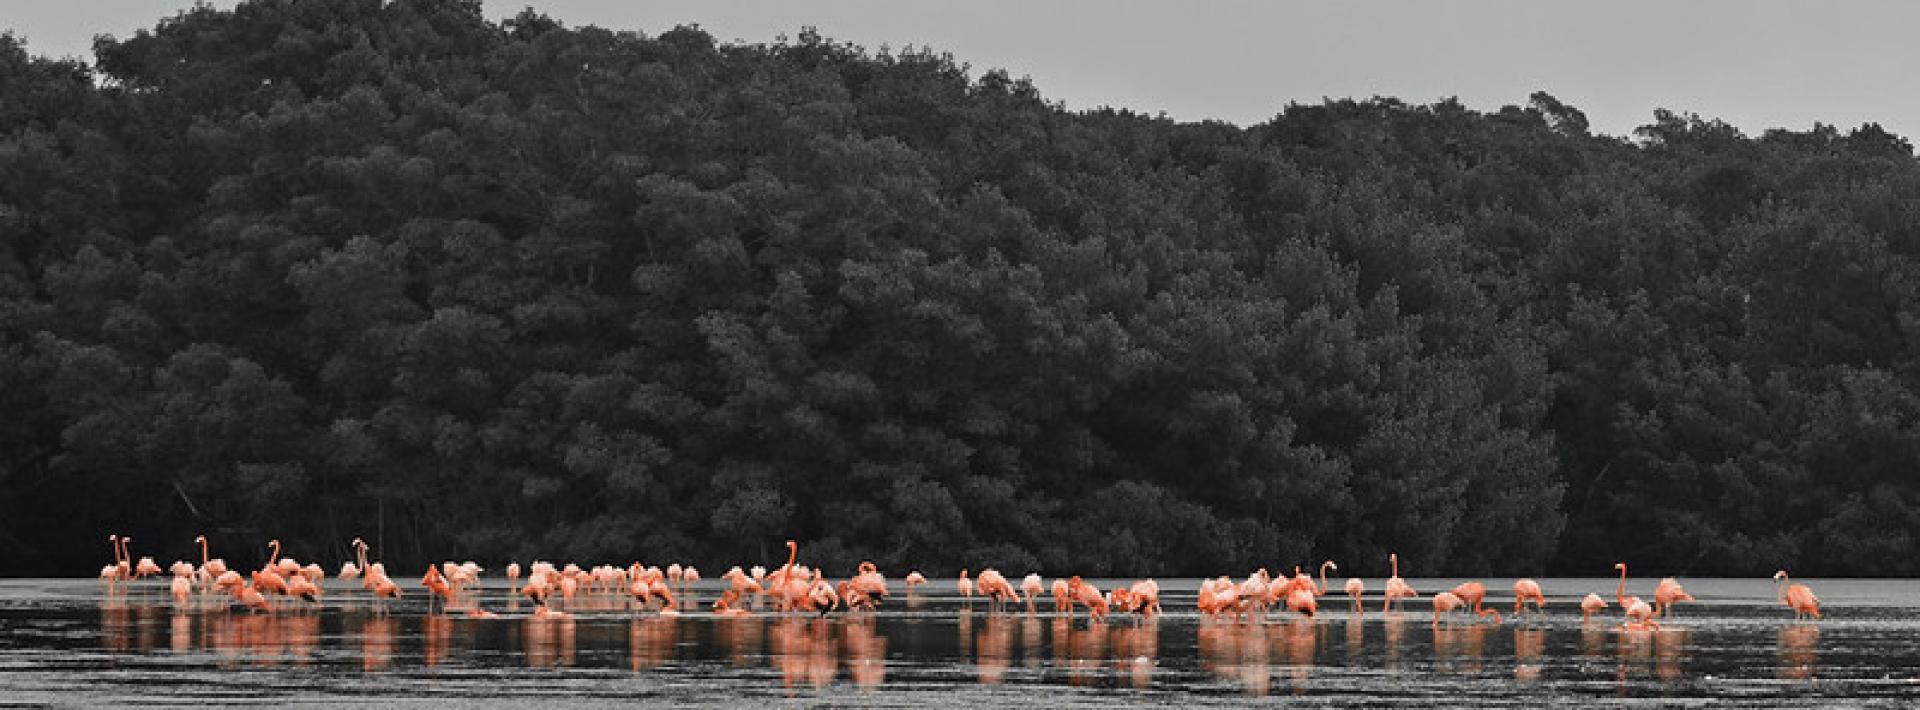 A group of flamingos in water with a mangrove forest in the background, in Mexico